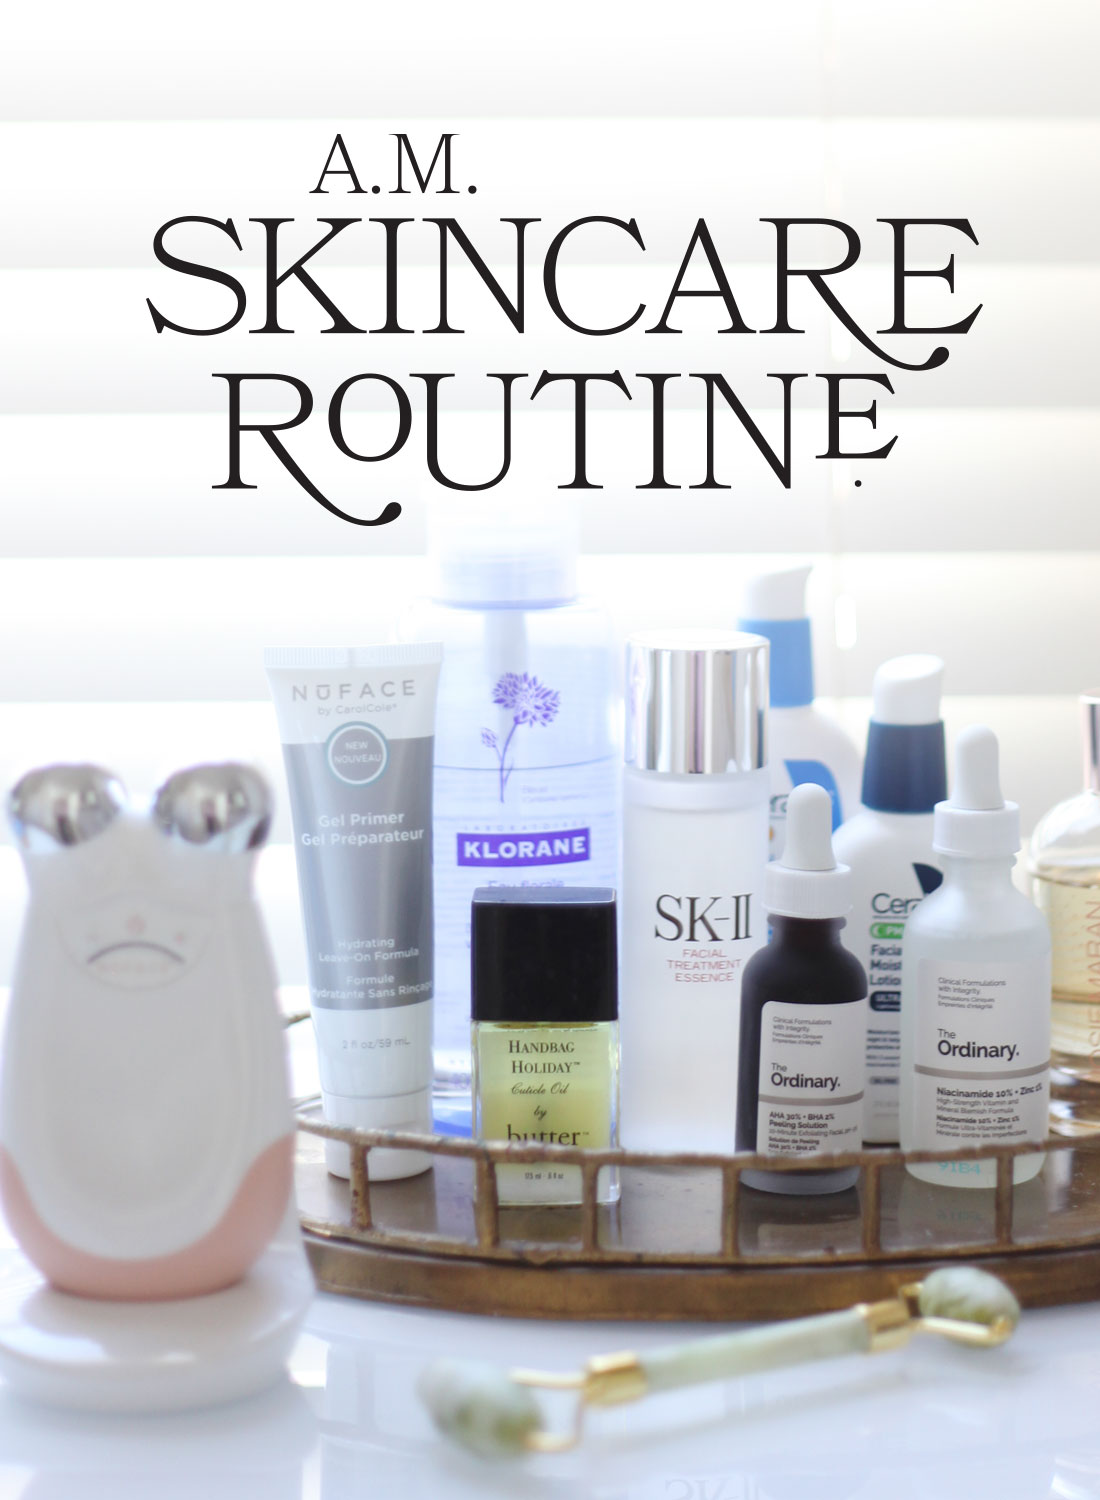 AM skincare routine for women over 40